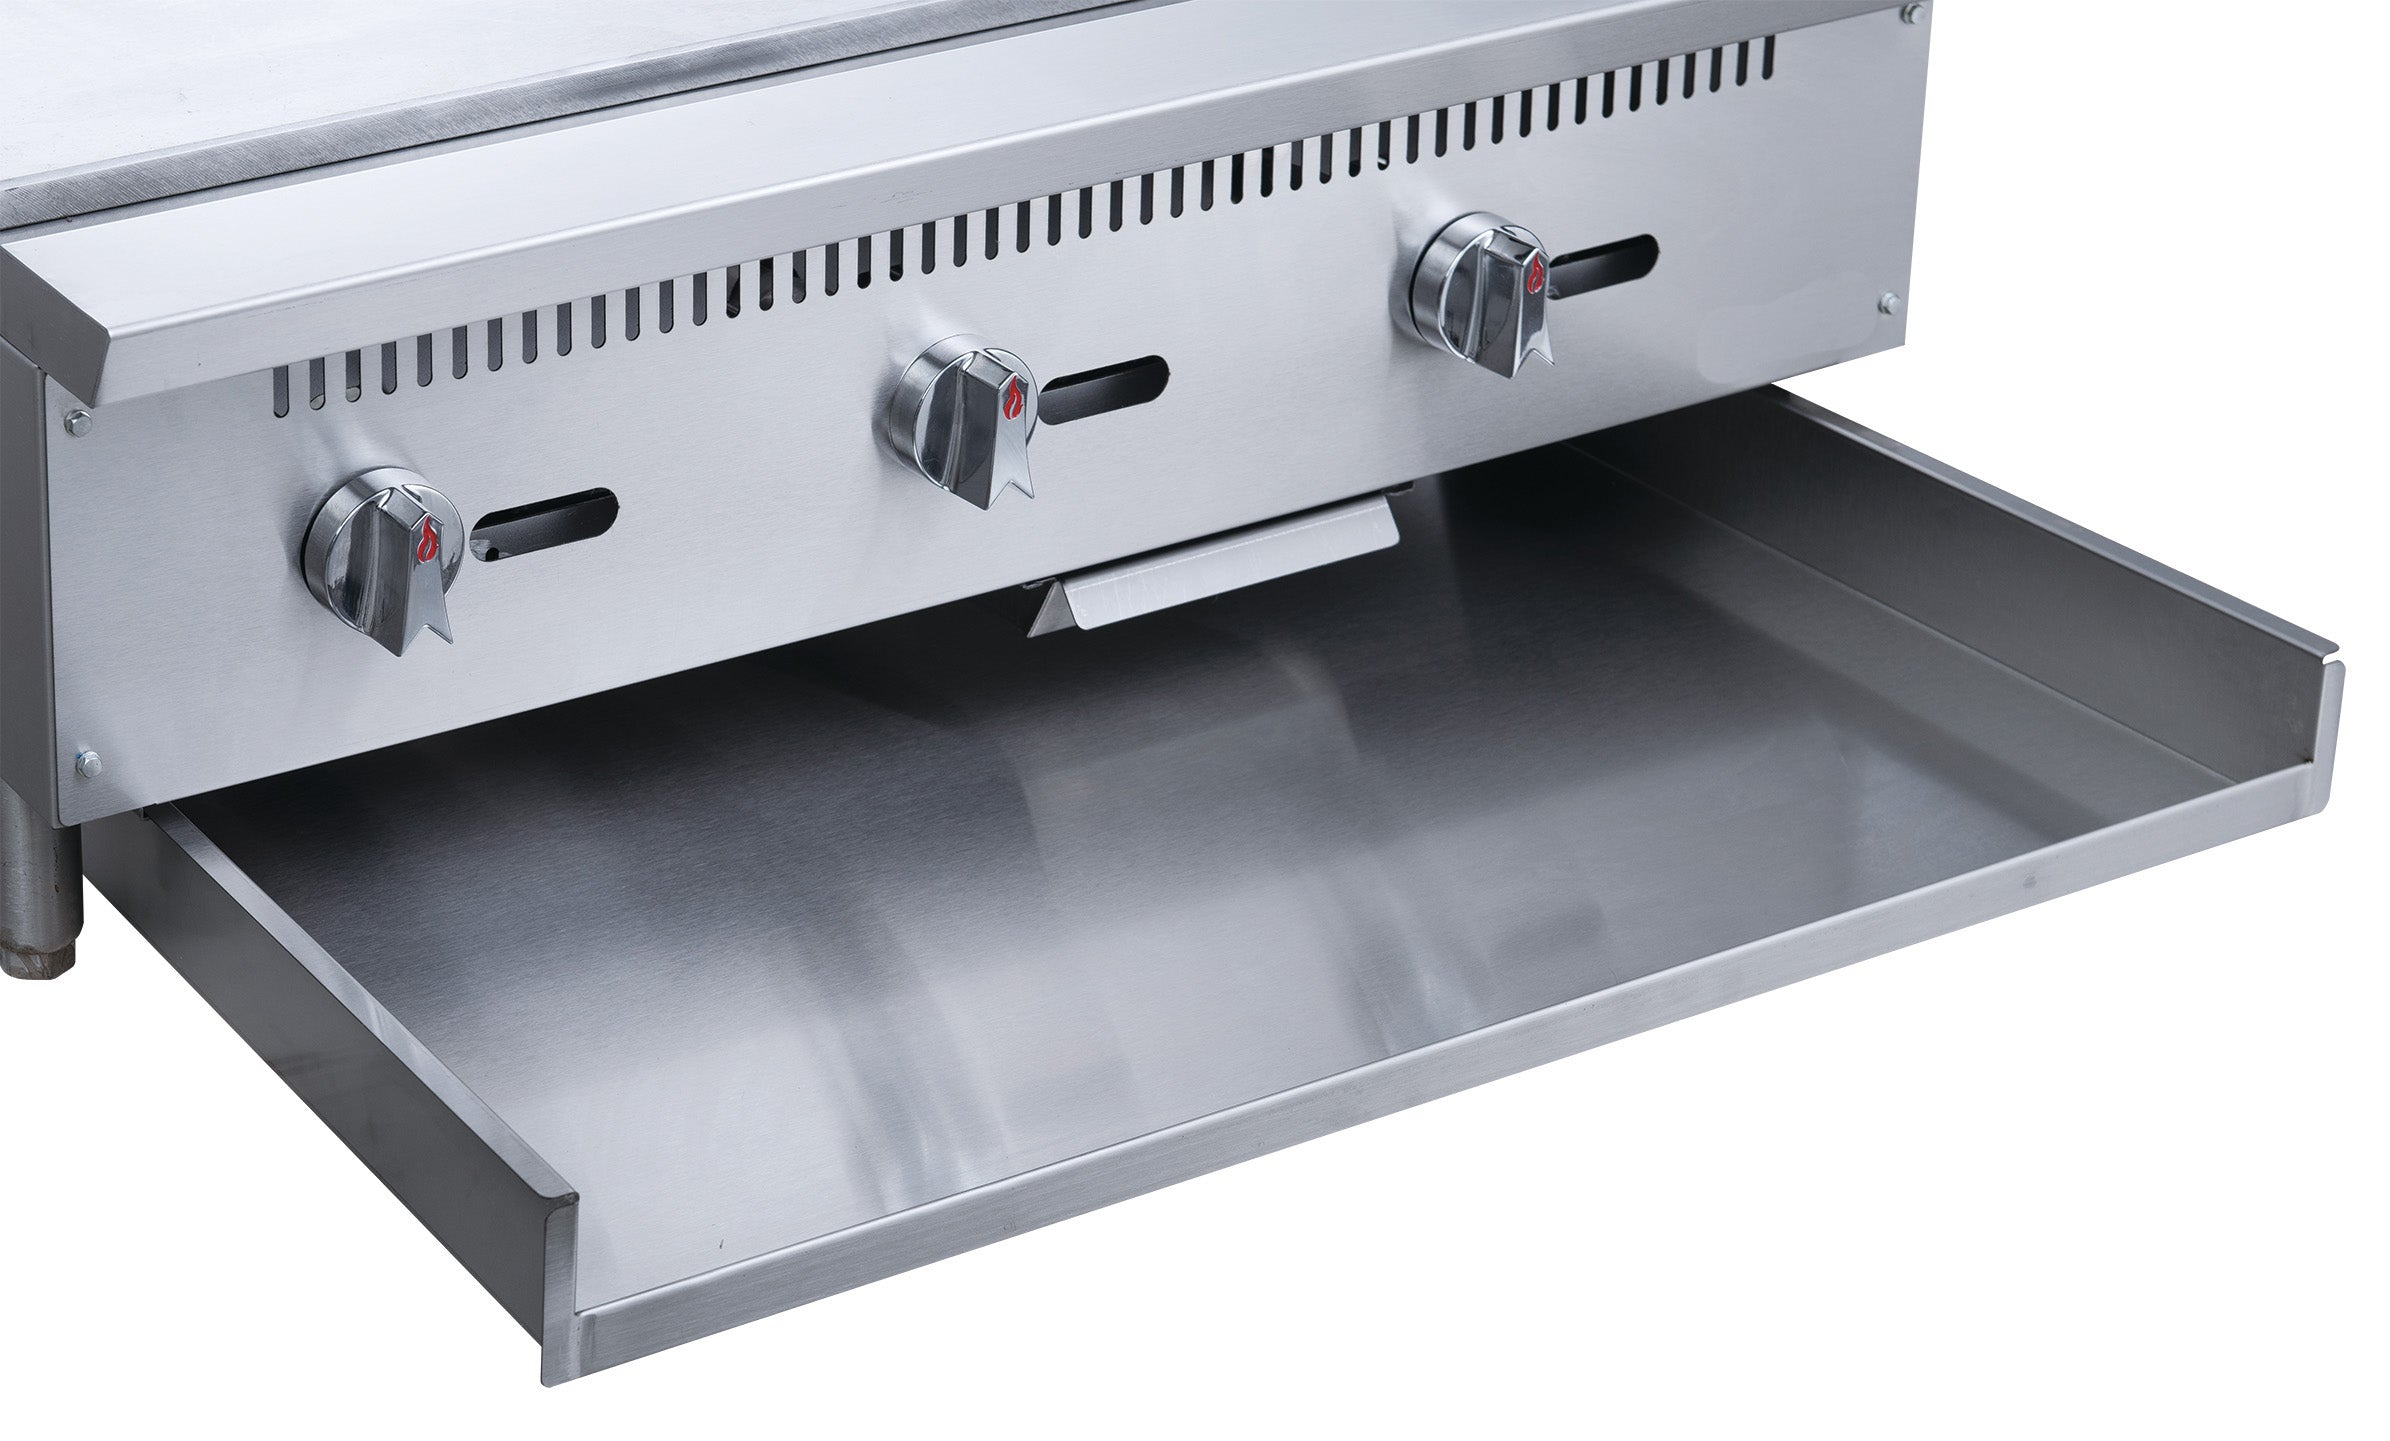 Chef AAA - TCGM24, Commercial 24 in. Countertop with Griddle with 2 Burners NG